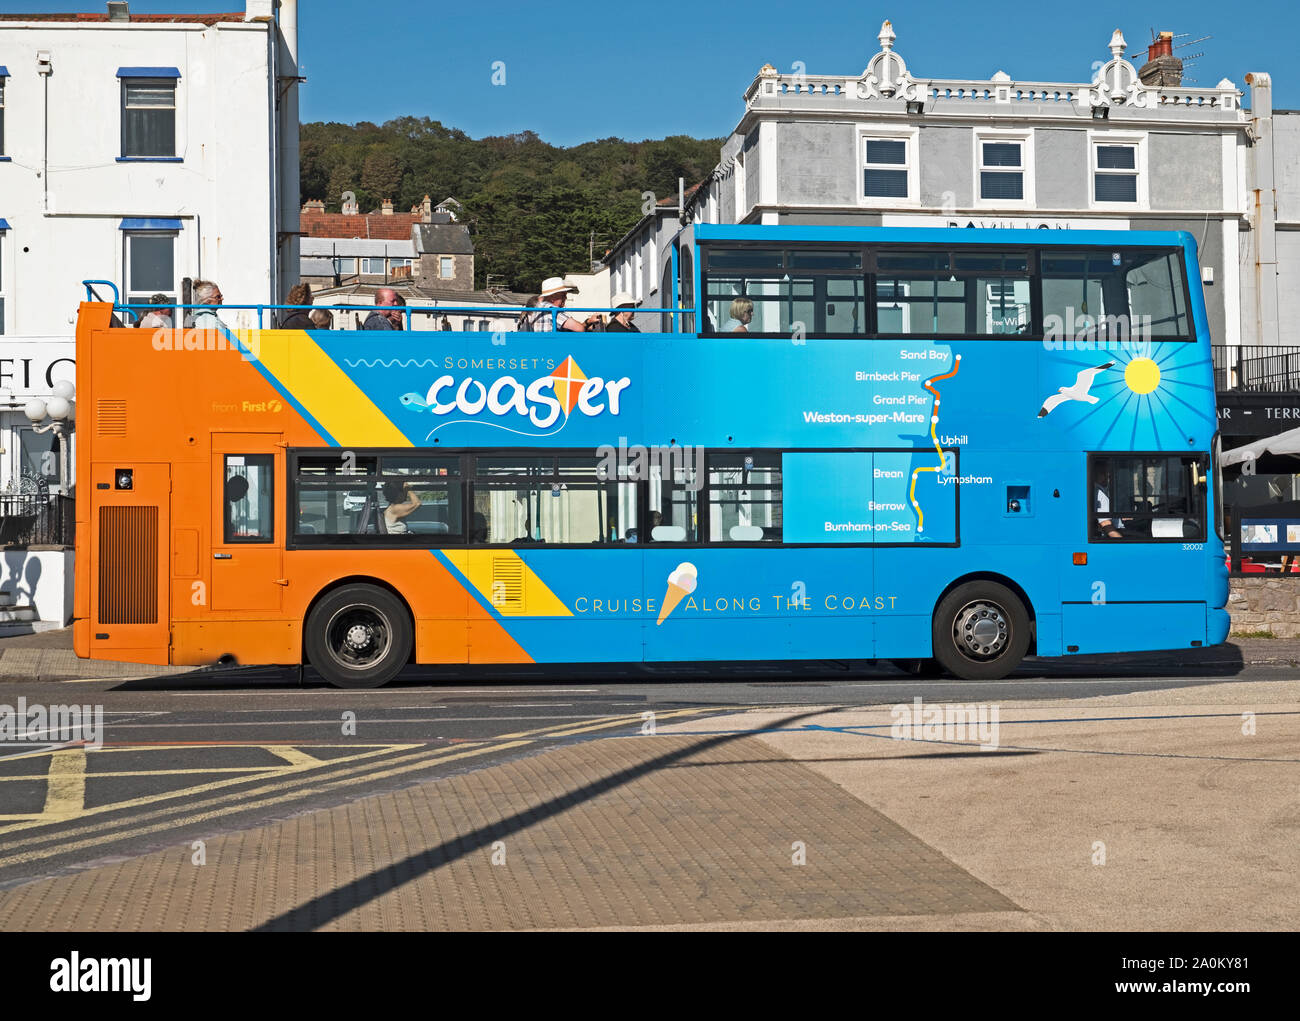 A Coaster open top bus in Weston-super-Mare, UK. The buses run on two routes from Weston-super-Mare to Sand Bay and Burnham-on-Sea. Stock Photo